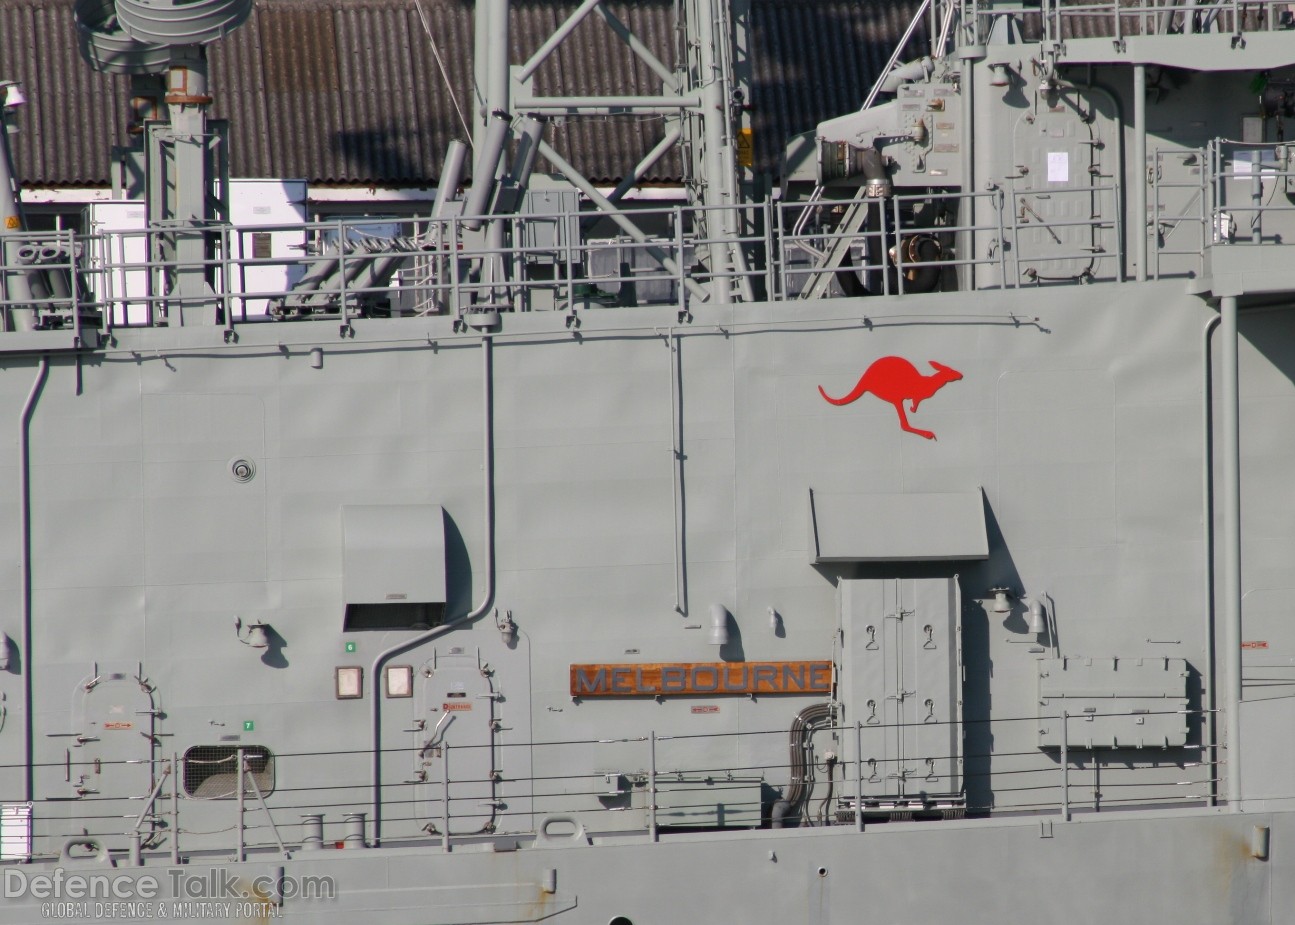 HMAS Melbourne chaff deck and Nulka launcher